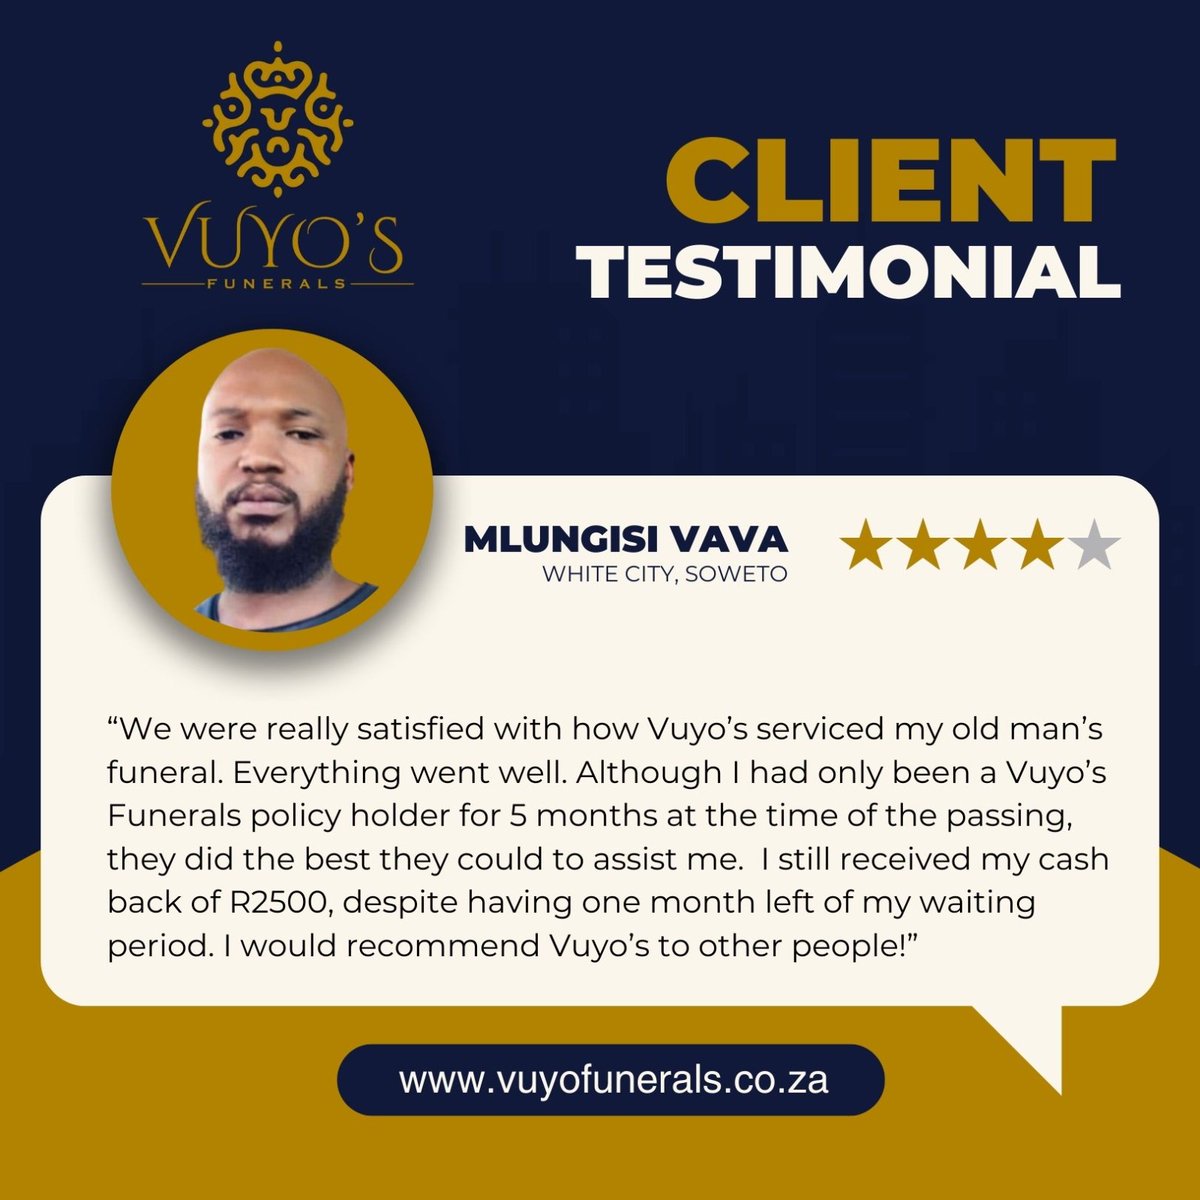 Talk to us today, our friendly and compassionate teams are always happy to assist. Let us be there for you when it matters the most.

Call us today on 011 936 8421.

#VuyosFunerals 
#ServingWithCompassion
#HeartMatters
#ServingWithPride
#DignityandRespect